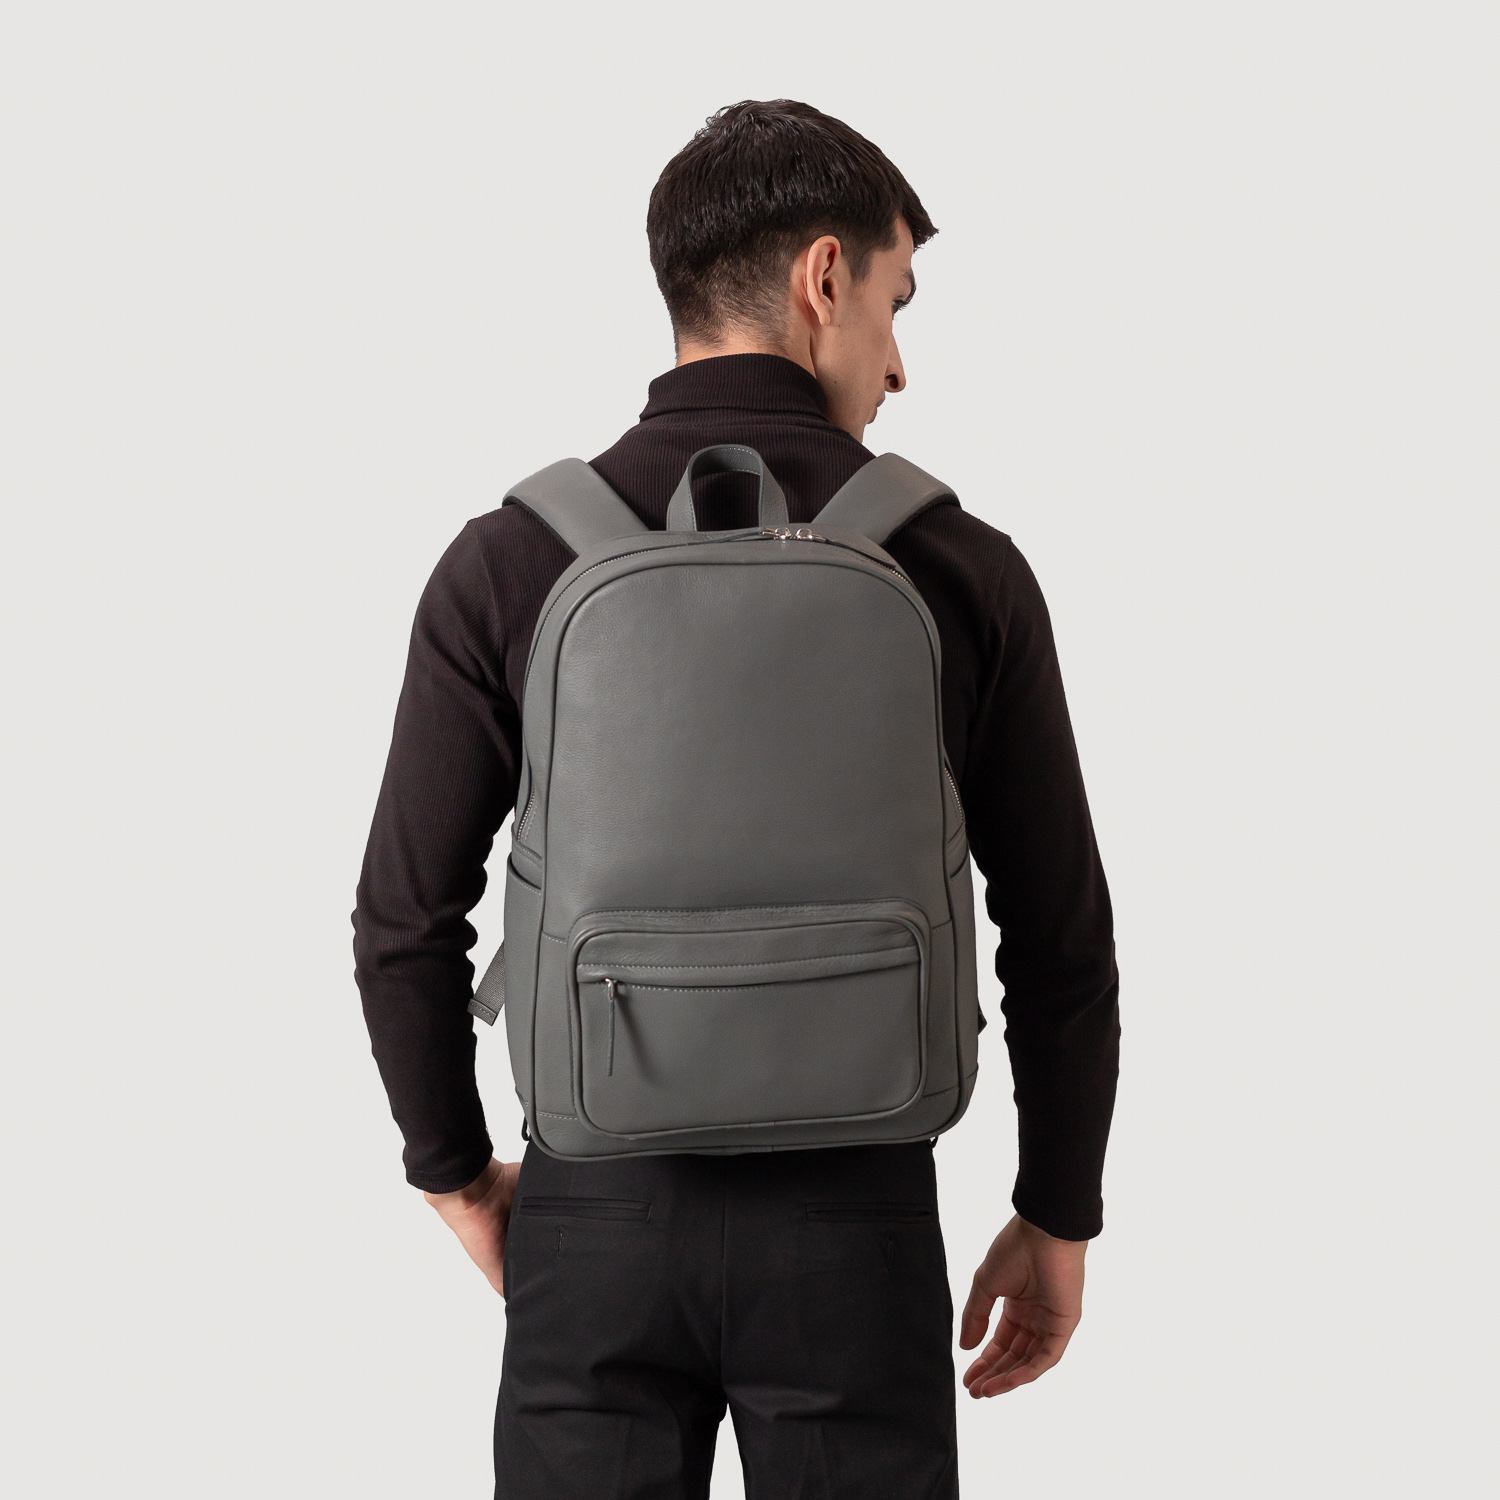 The Philos Grey Leather Backpack